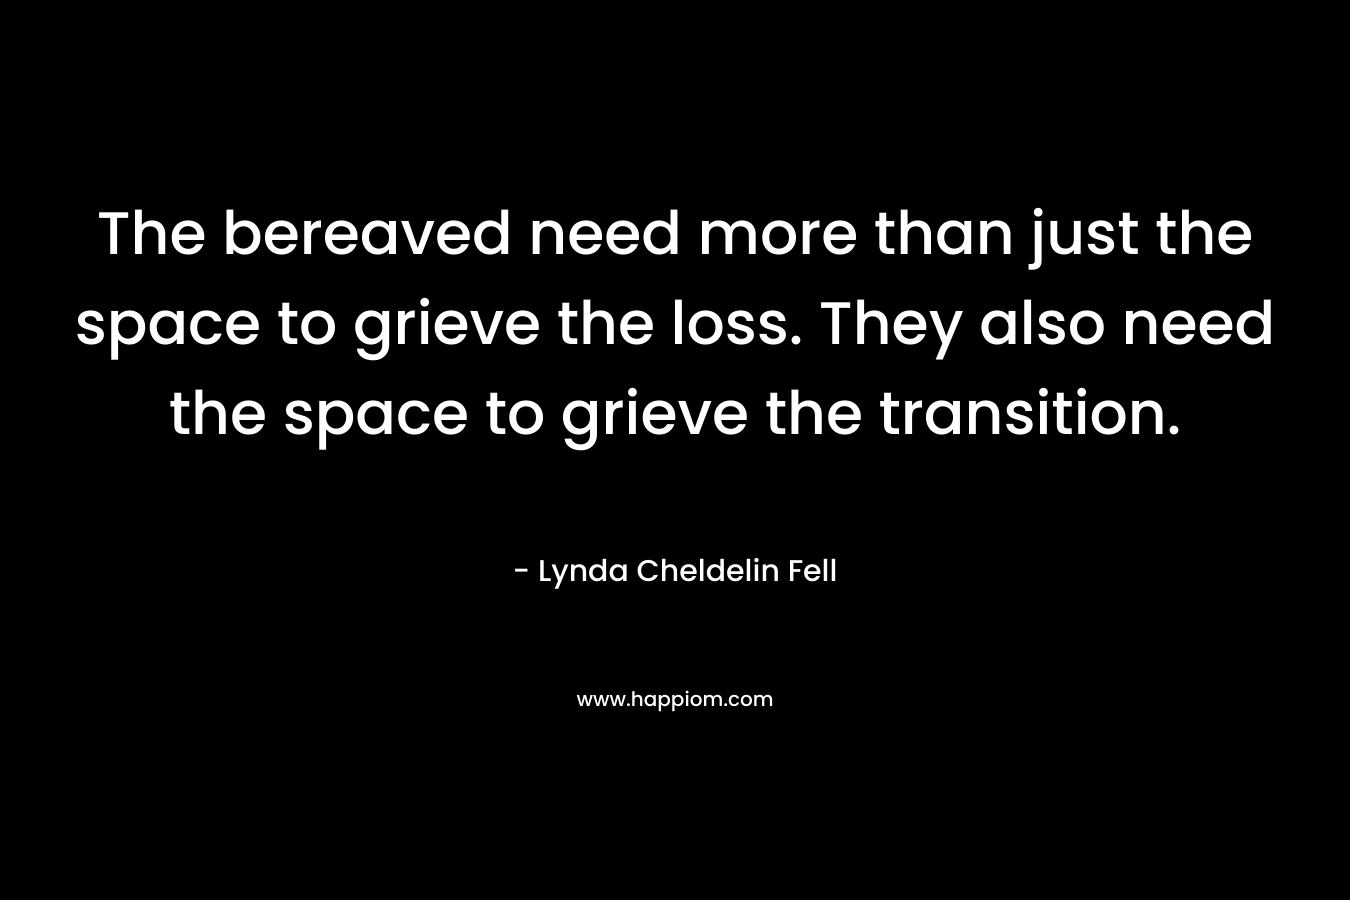 The bereaved need more than just the space to grieve the loss. They also need the space to grieve the transition. – Lynda Cheldelin Fell